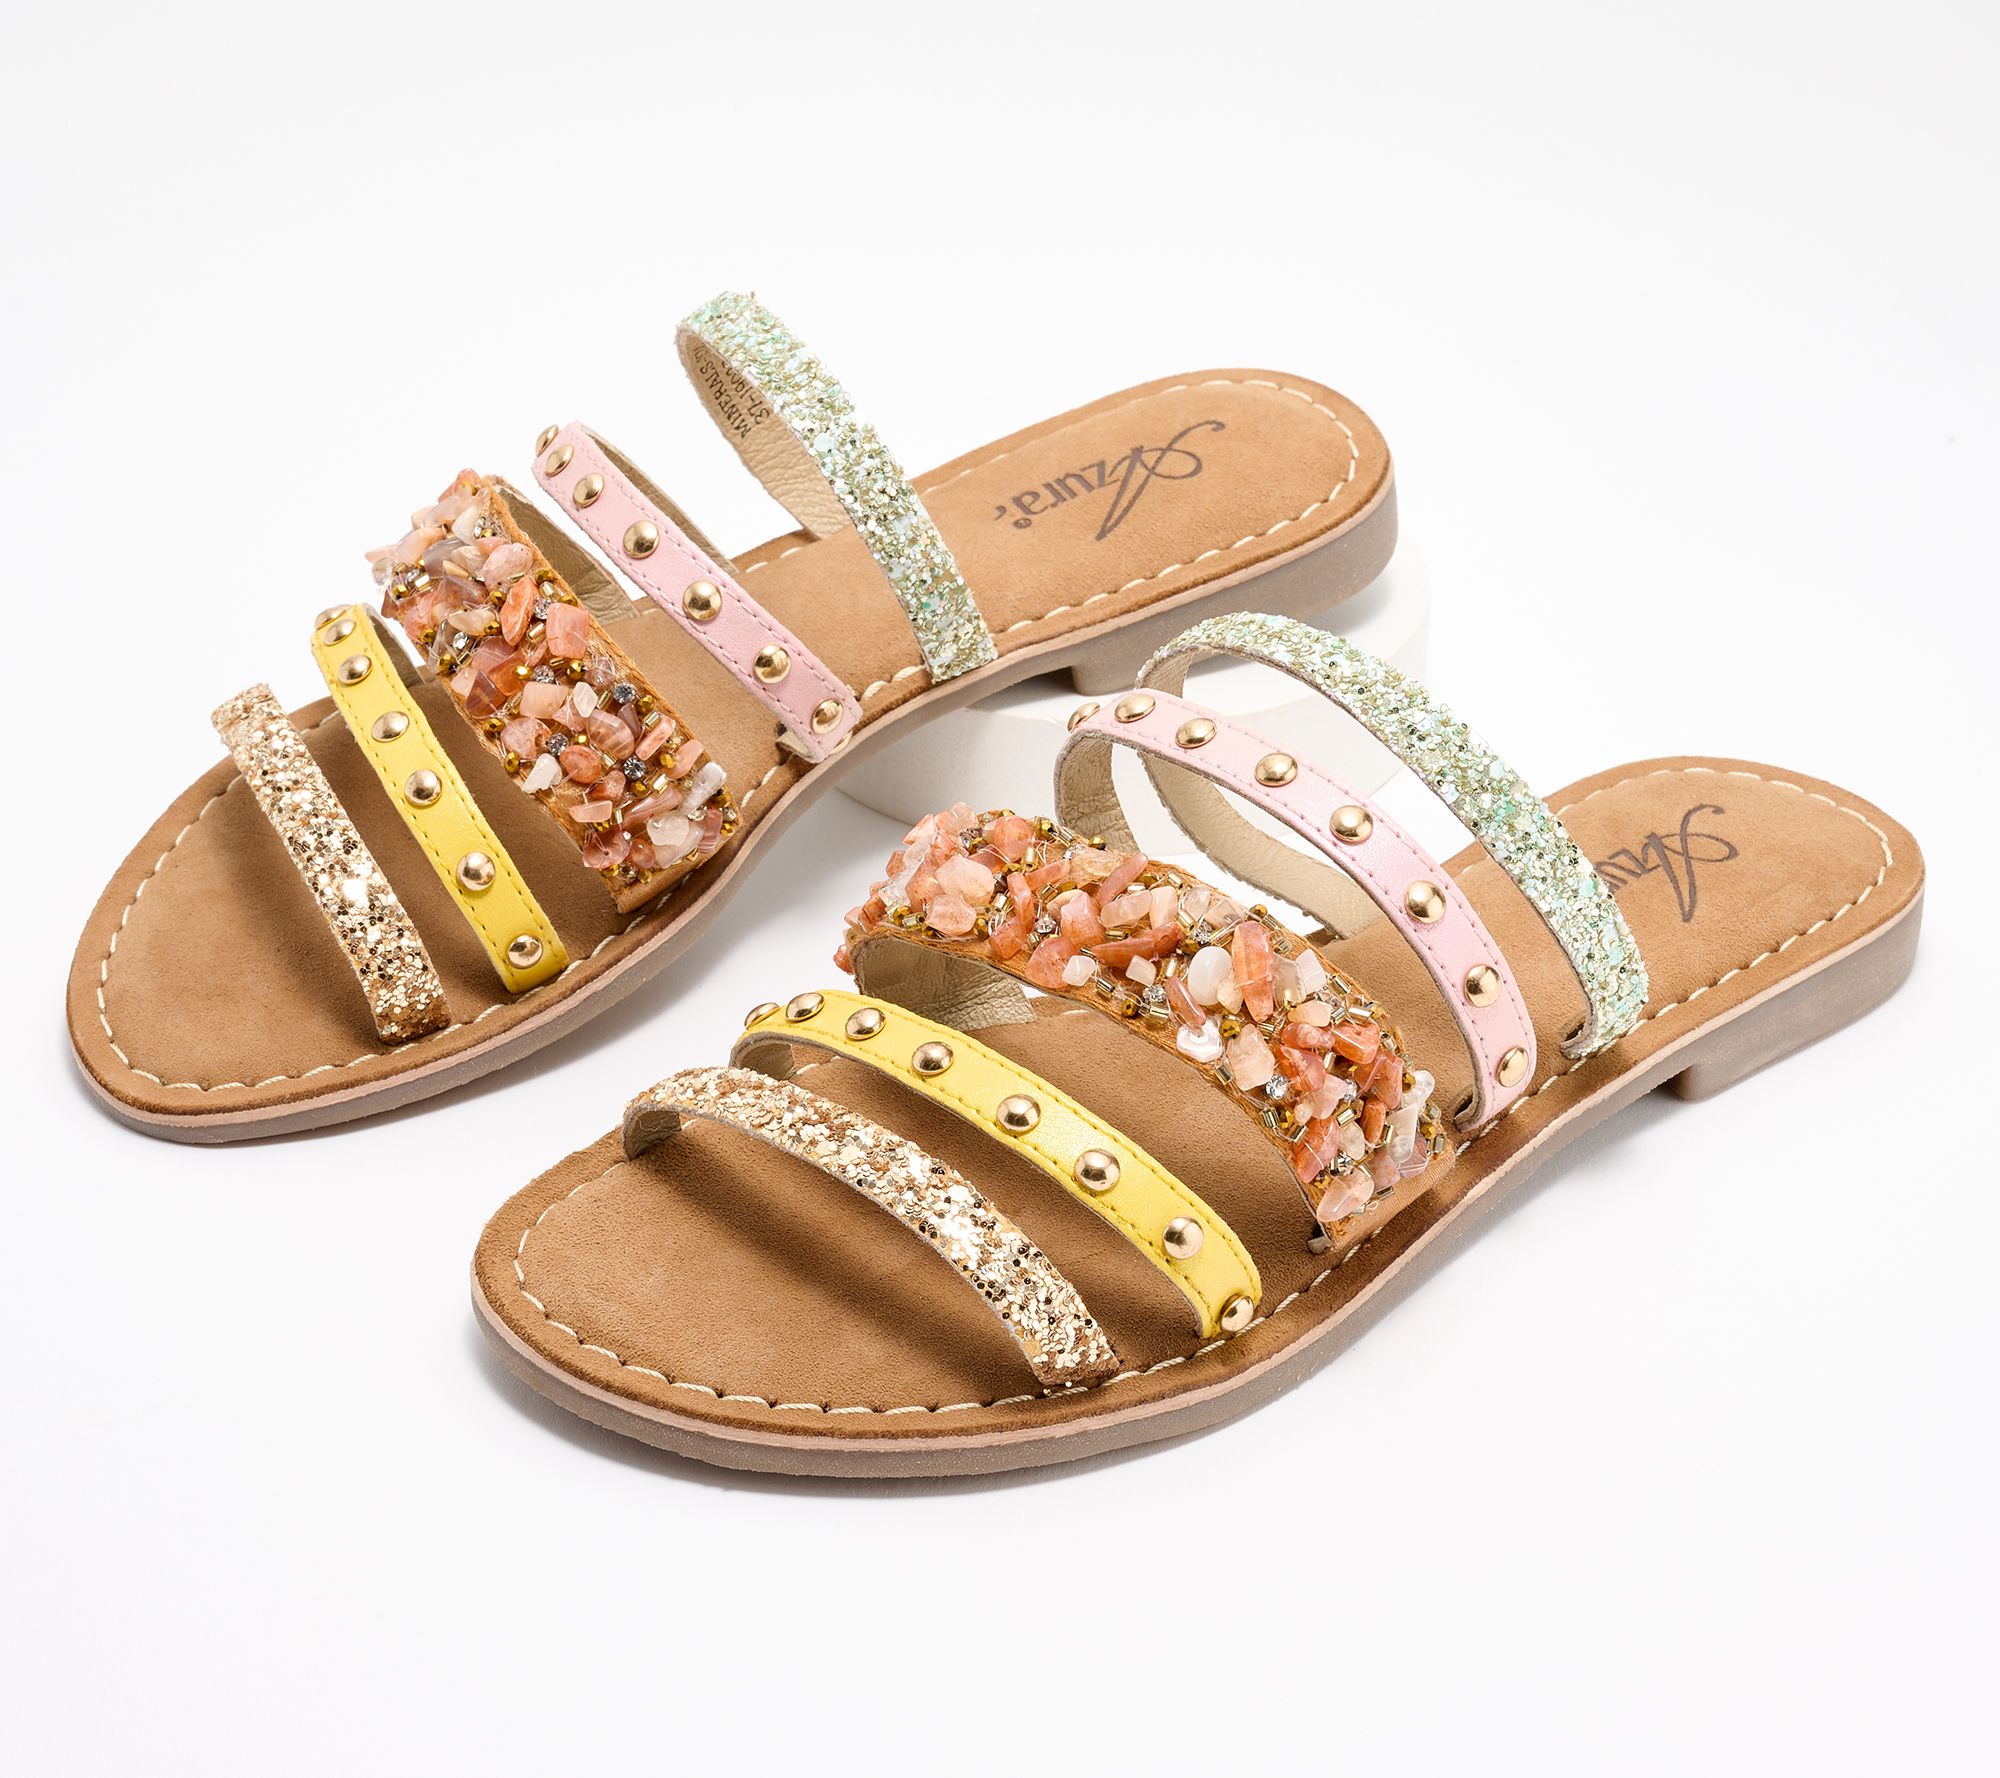 Shop these Stylish Birkenstock Sandals for Spring From QVC